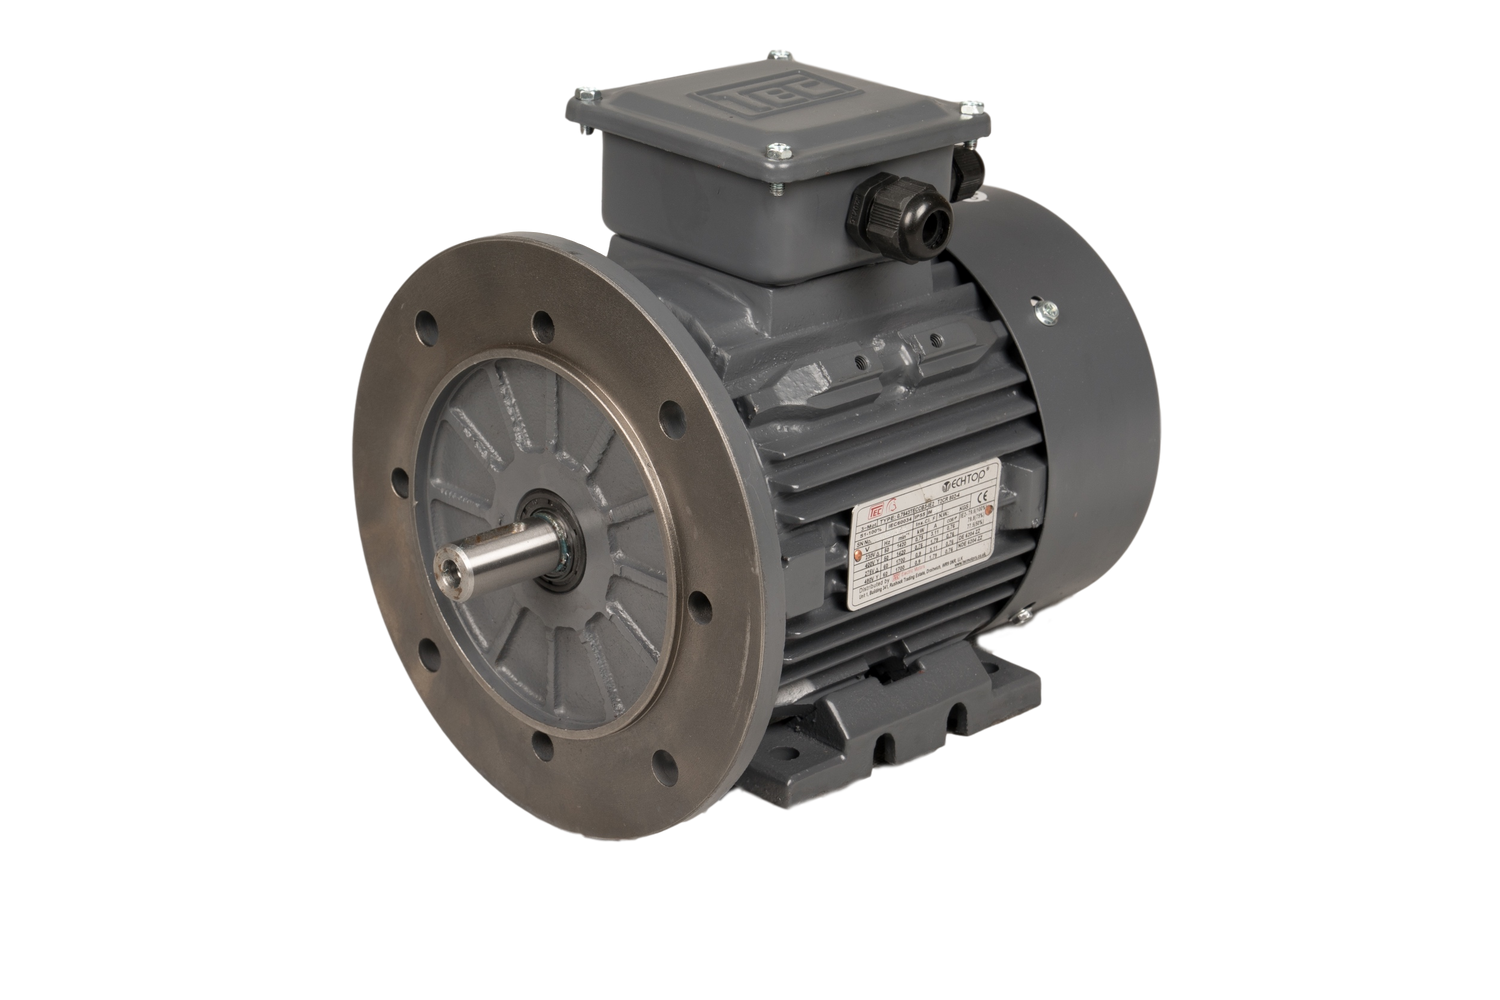 TEC-Three-Phase-Cast-Iron-Electric-Motor-75kw-4-Pole-Flange-Mounted-B5-IE2